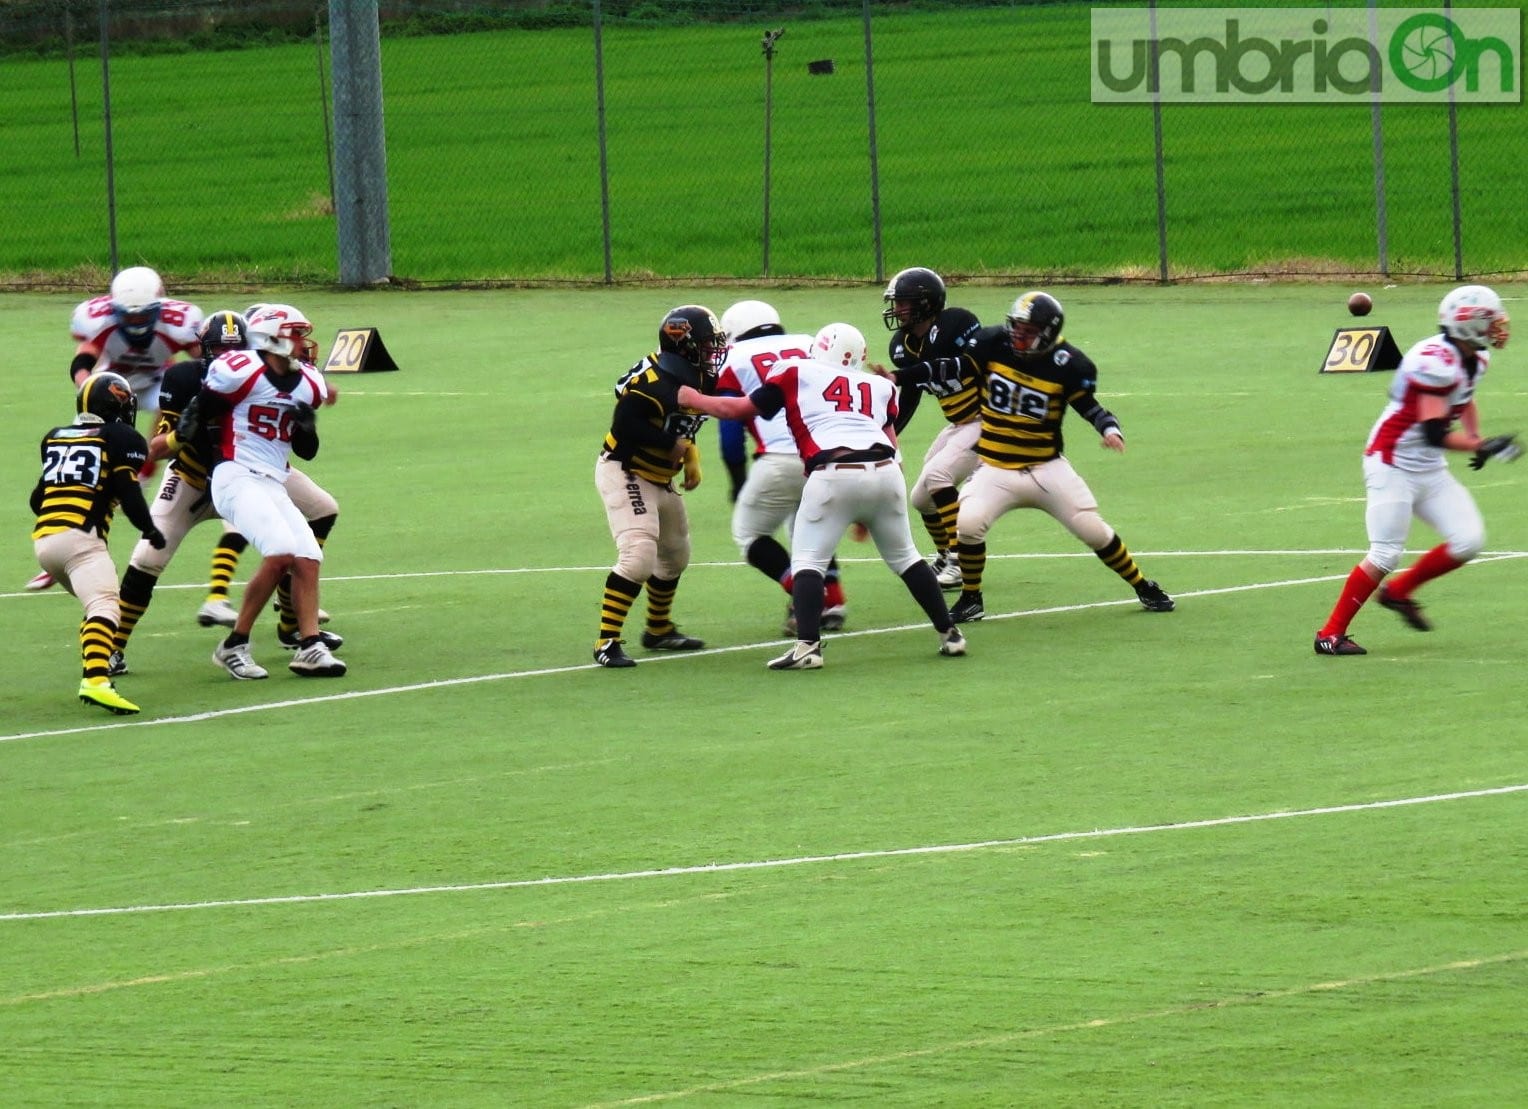 steelers grifoni football91 | umbriaON